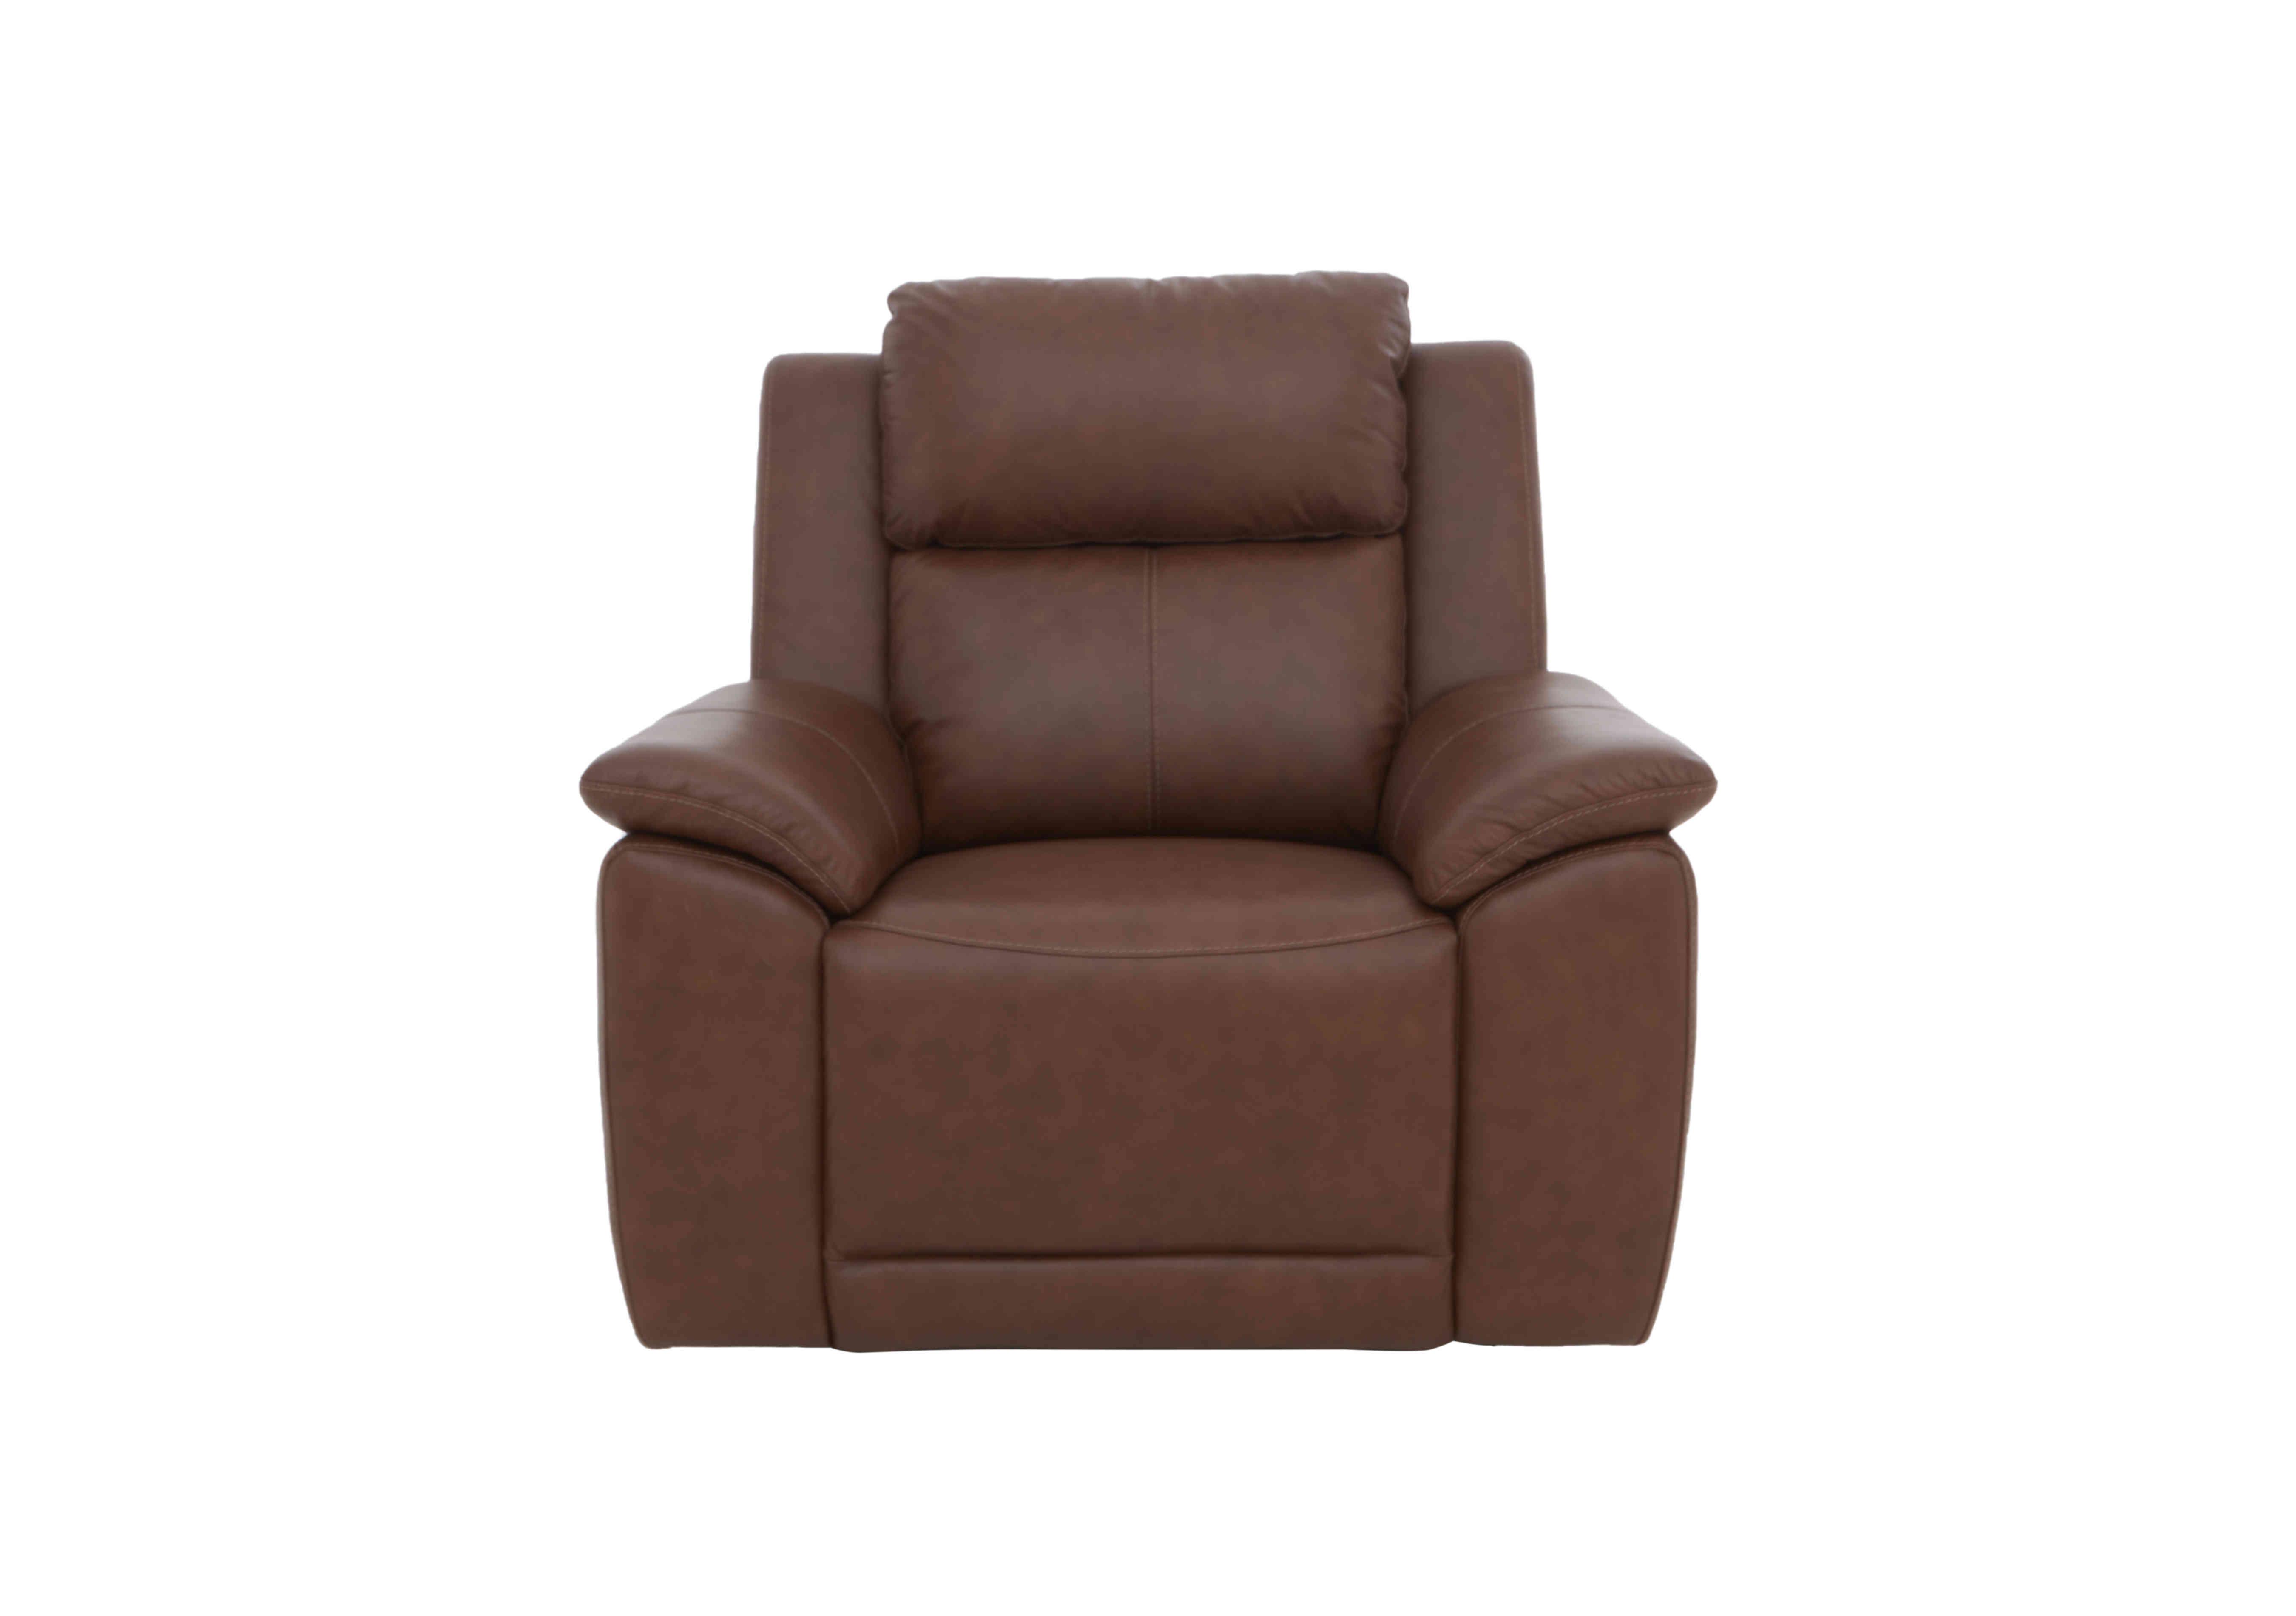 Utah Leather Power Recliner Chair with Power Headrest and Power Lumbar in Roast Lx-6414 on Furniture Village